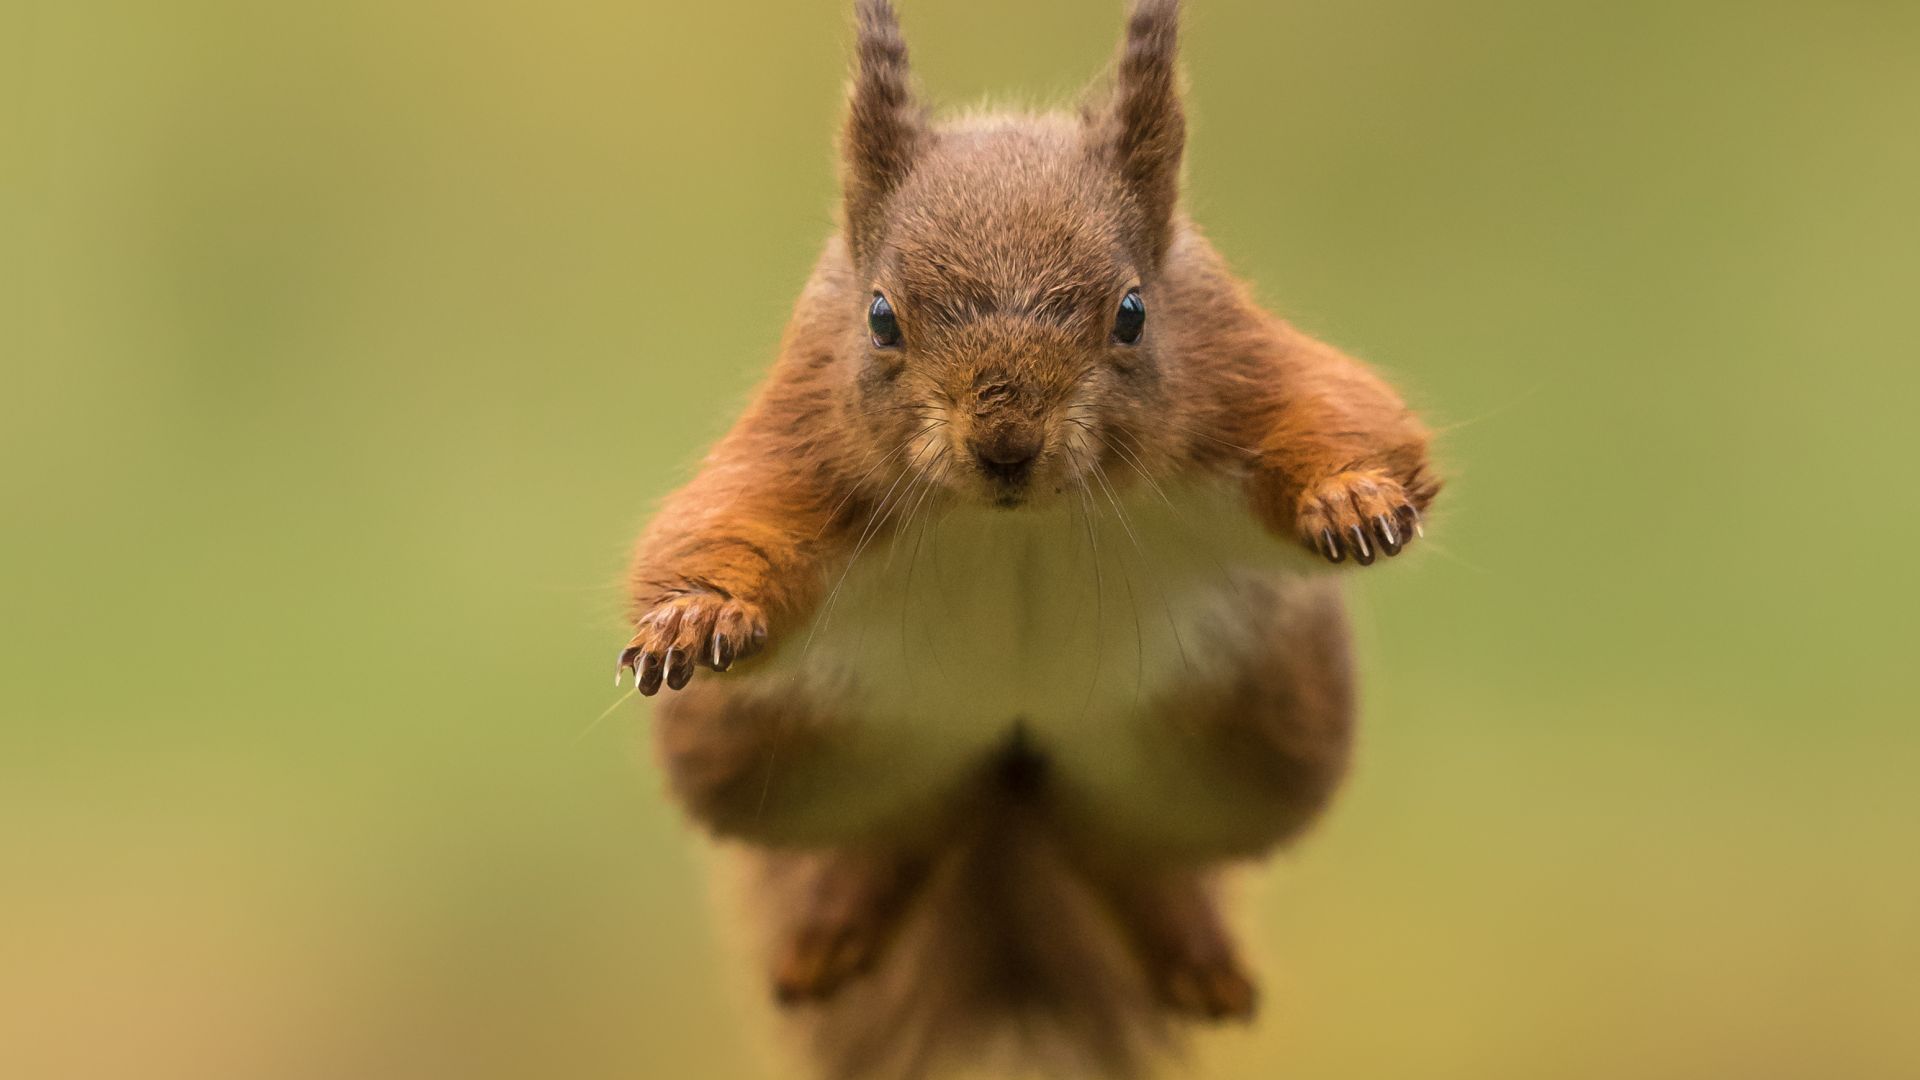 Wallpaper Red, rodent, jump, animal, squirrel